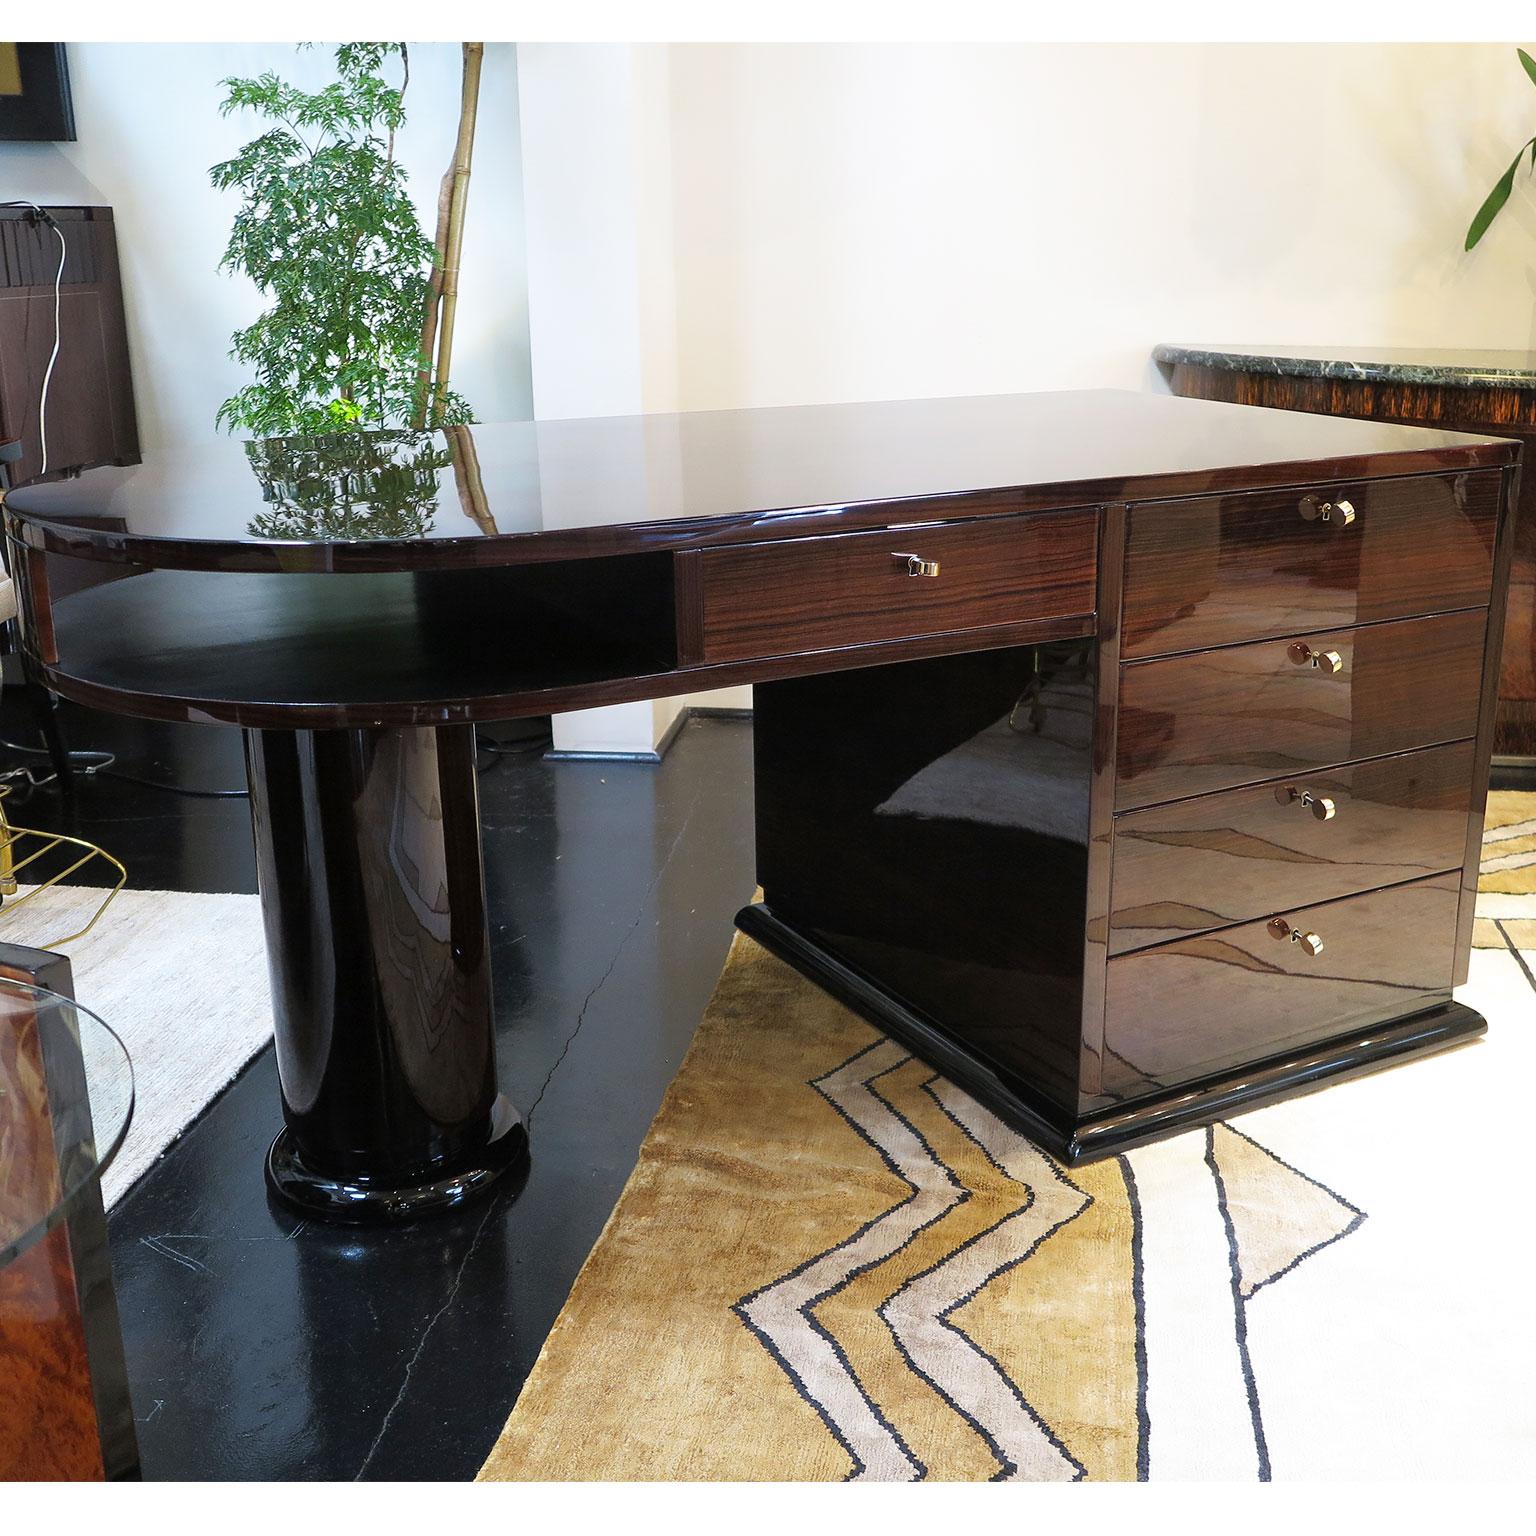 French Art Deco desk featuring a curved end with round pedestal leg. The other end featured a square pedestal leg with four drawers for storage. There is a pencil drawer in the center as well as an open shelf space by the curved pedestal base. Done